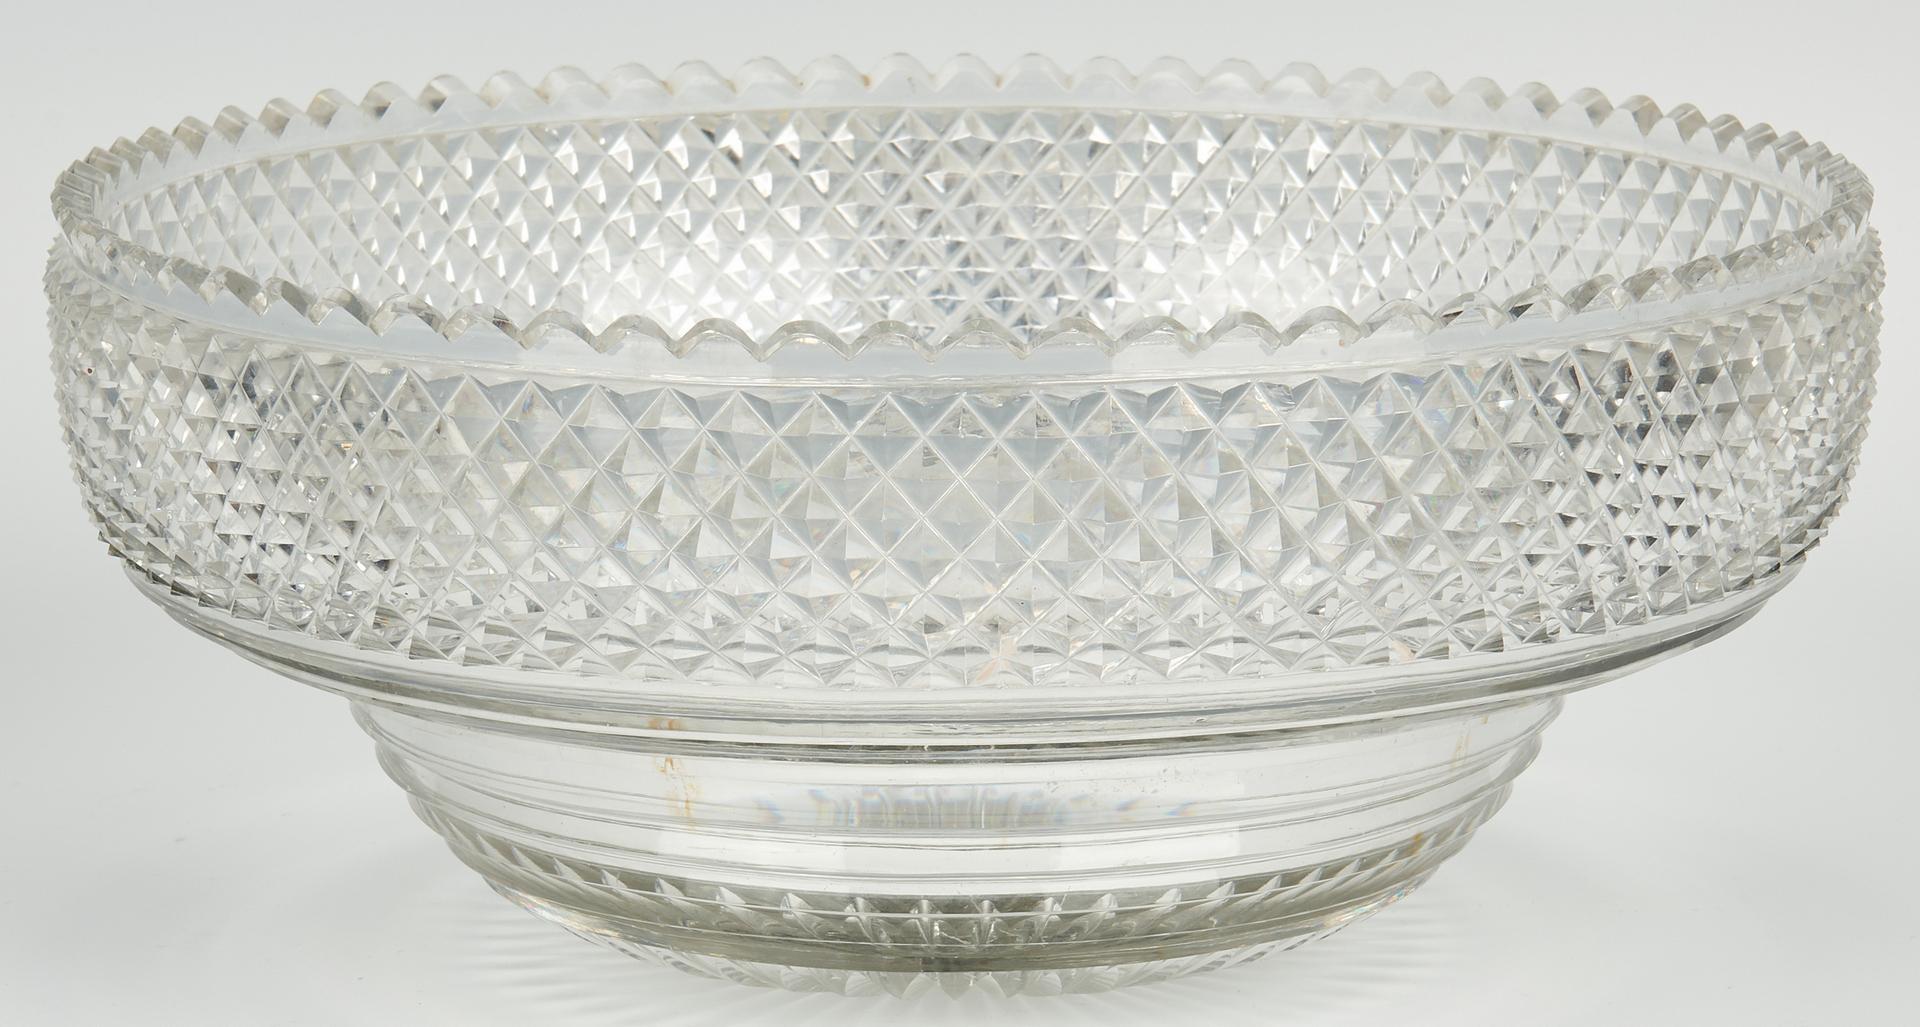 Emes & Barnard Georgian Sterling Centerpiece with Cut Glass Bowl - Image 10 of 14